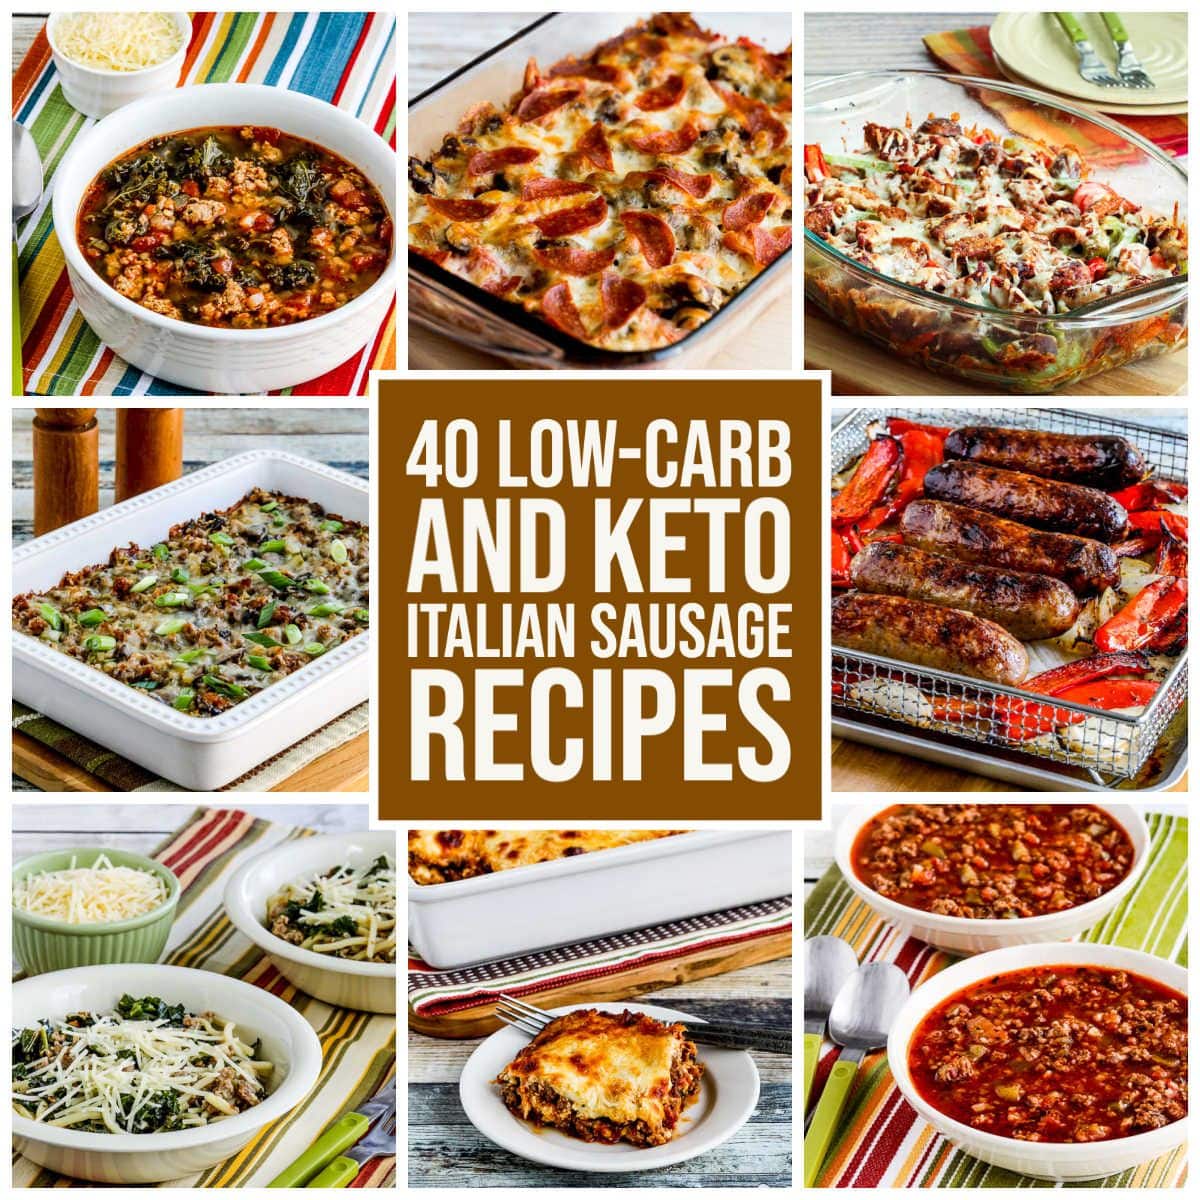 40 Low-Carb and Keto Italian Sausage Recipes collage of featured recipes with text overlay